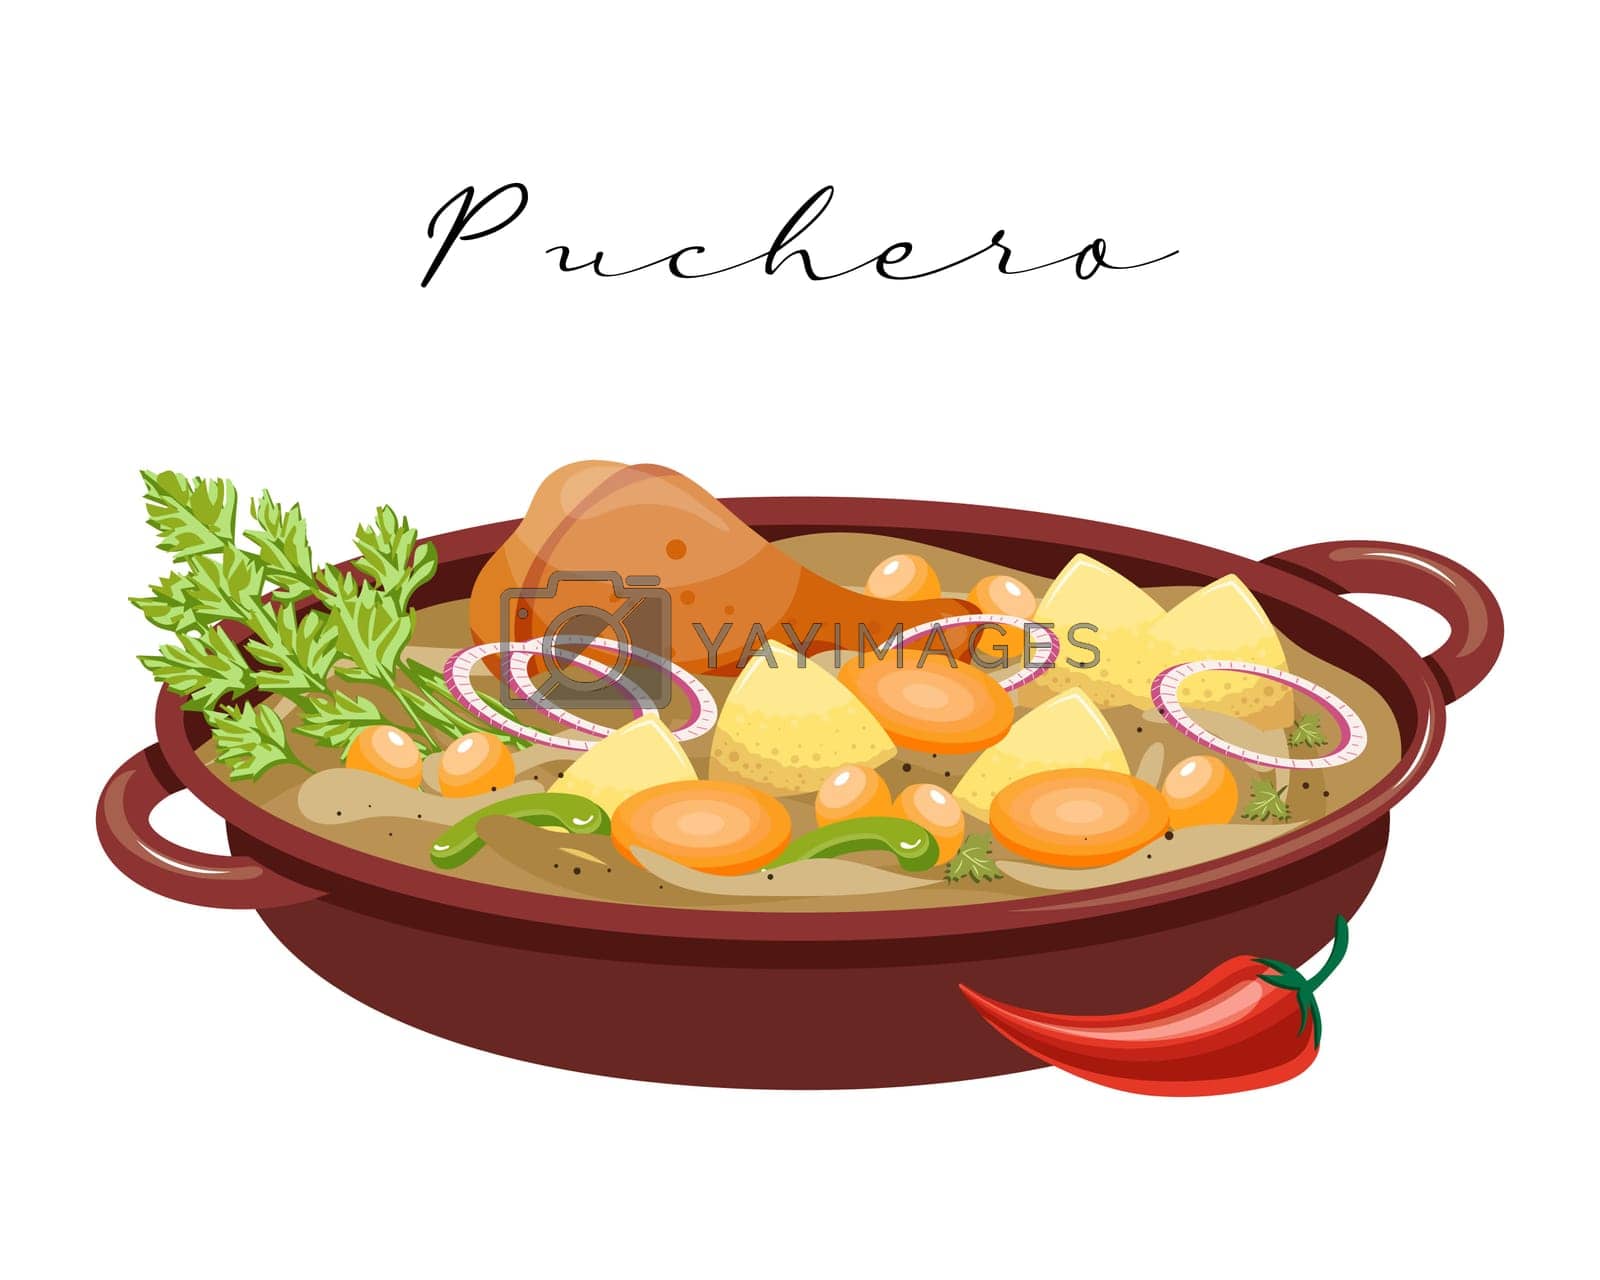 Royalty free image of Hot dish Puchero, stewed vegetables with meat, Latin American cuisine. Food illustration by VS1959